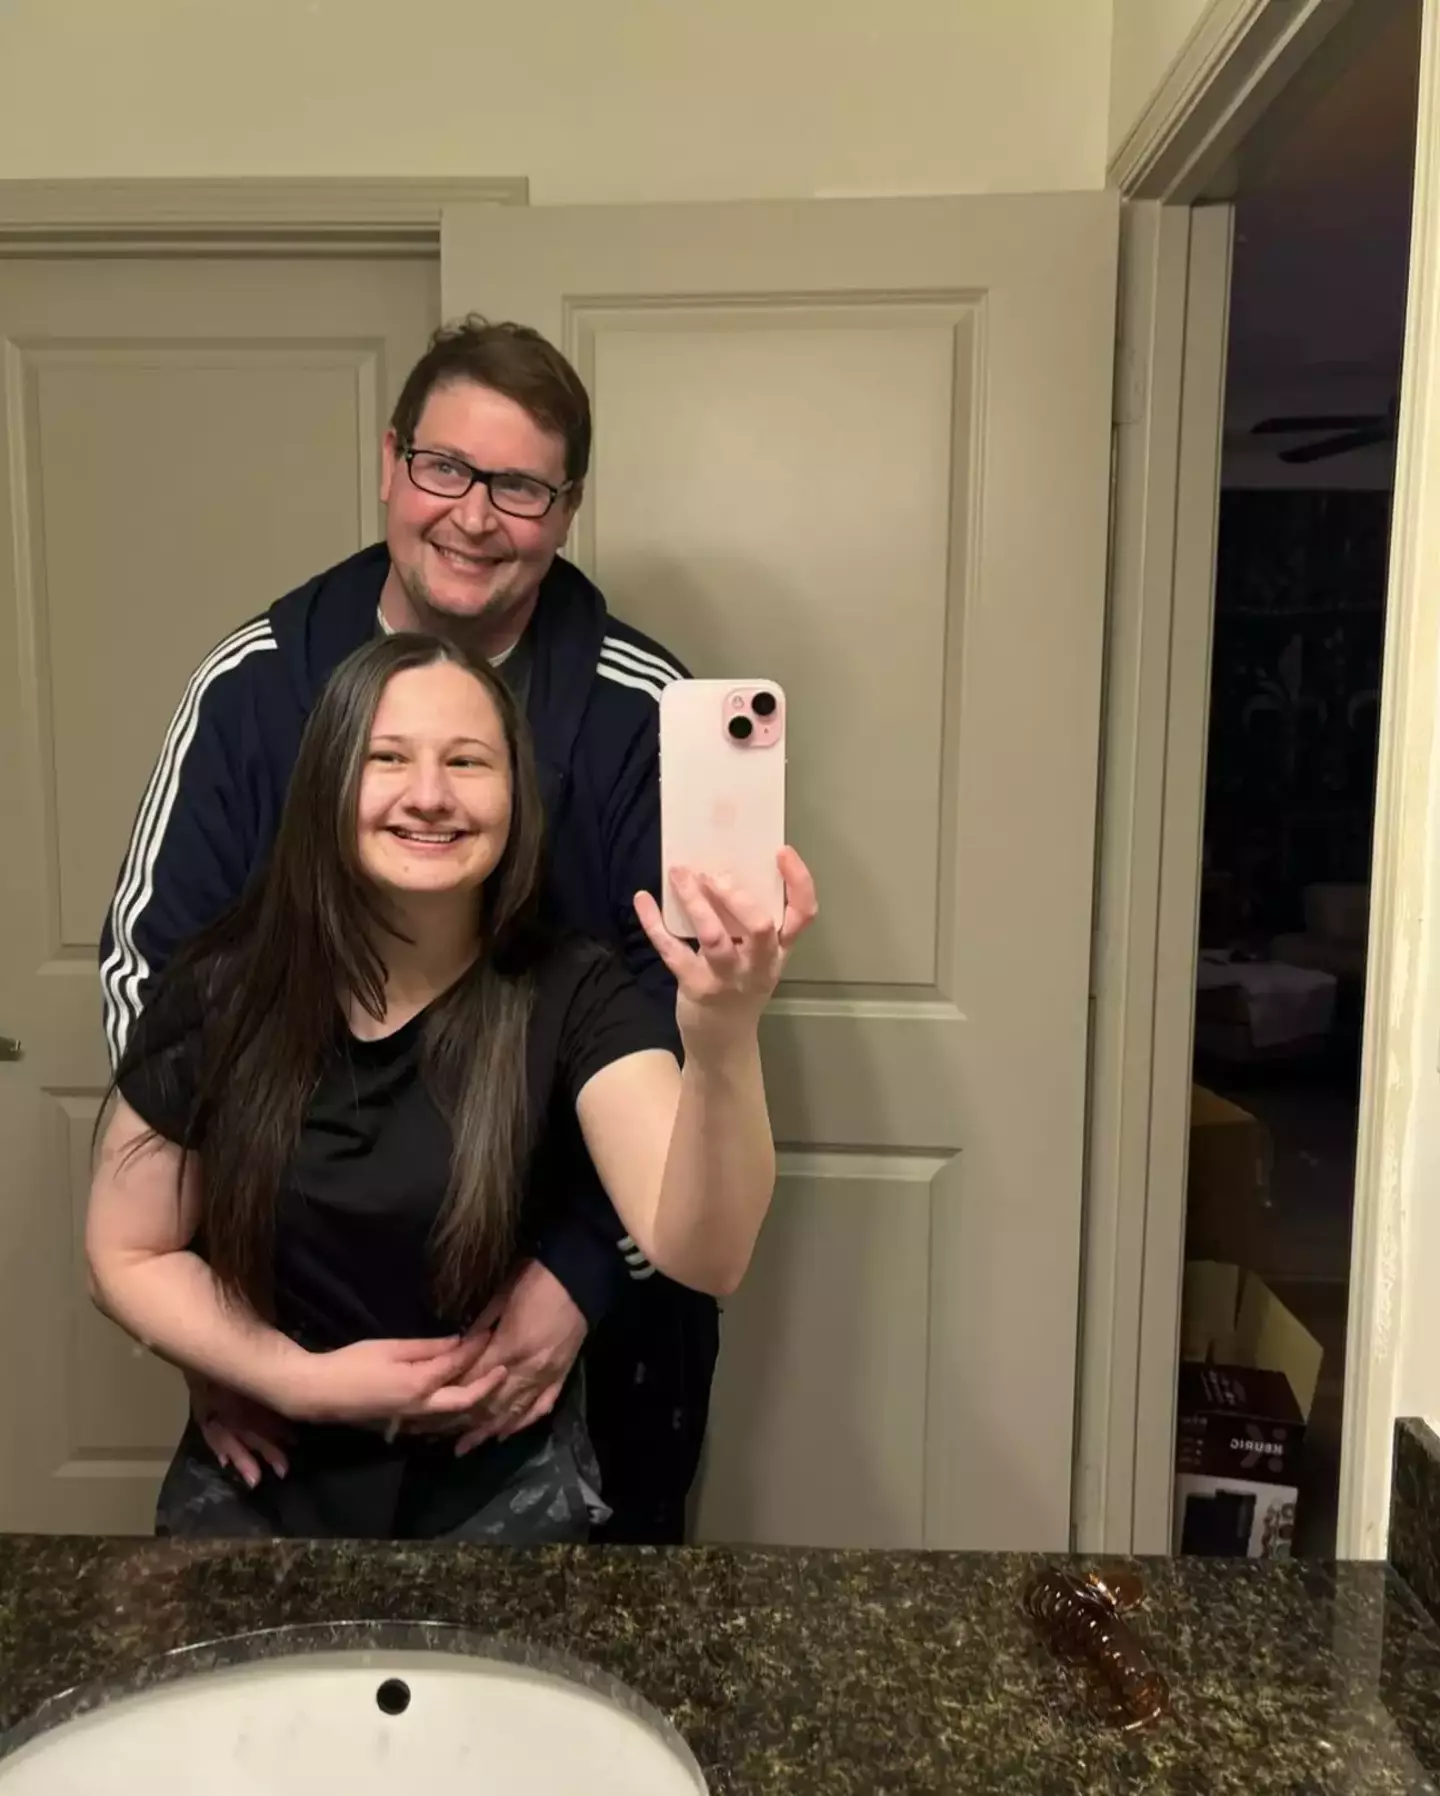 Both Gypsy-Rose Blanchard and her estranged husband have filed restraining orders against each other.